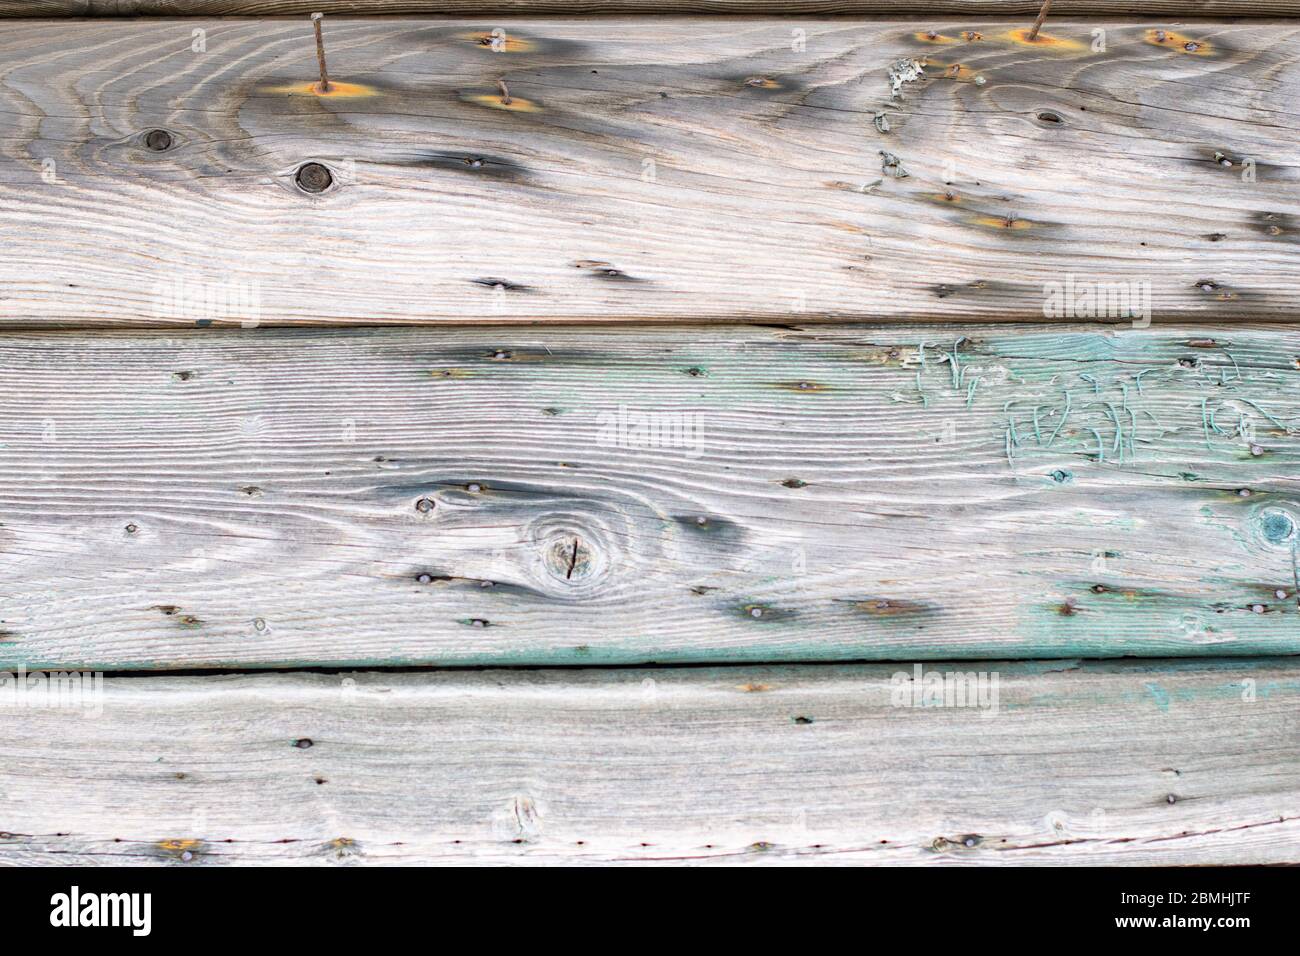 natural wood background, plank, blue teal grain, stripped planks, knots, photo, image, nature, pure, outside, outdoor, wooden planks, boards Stock Photo